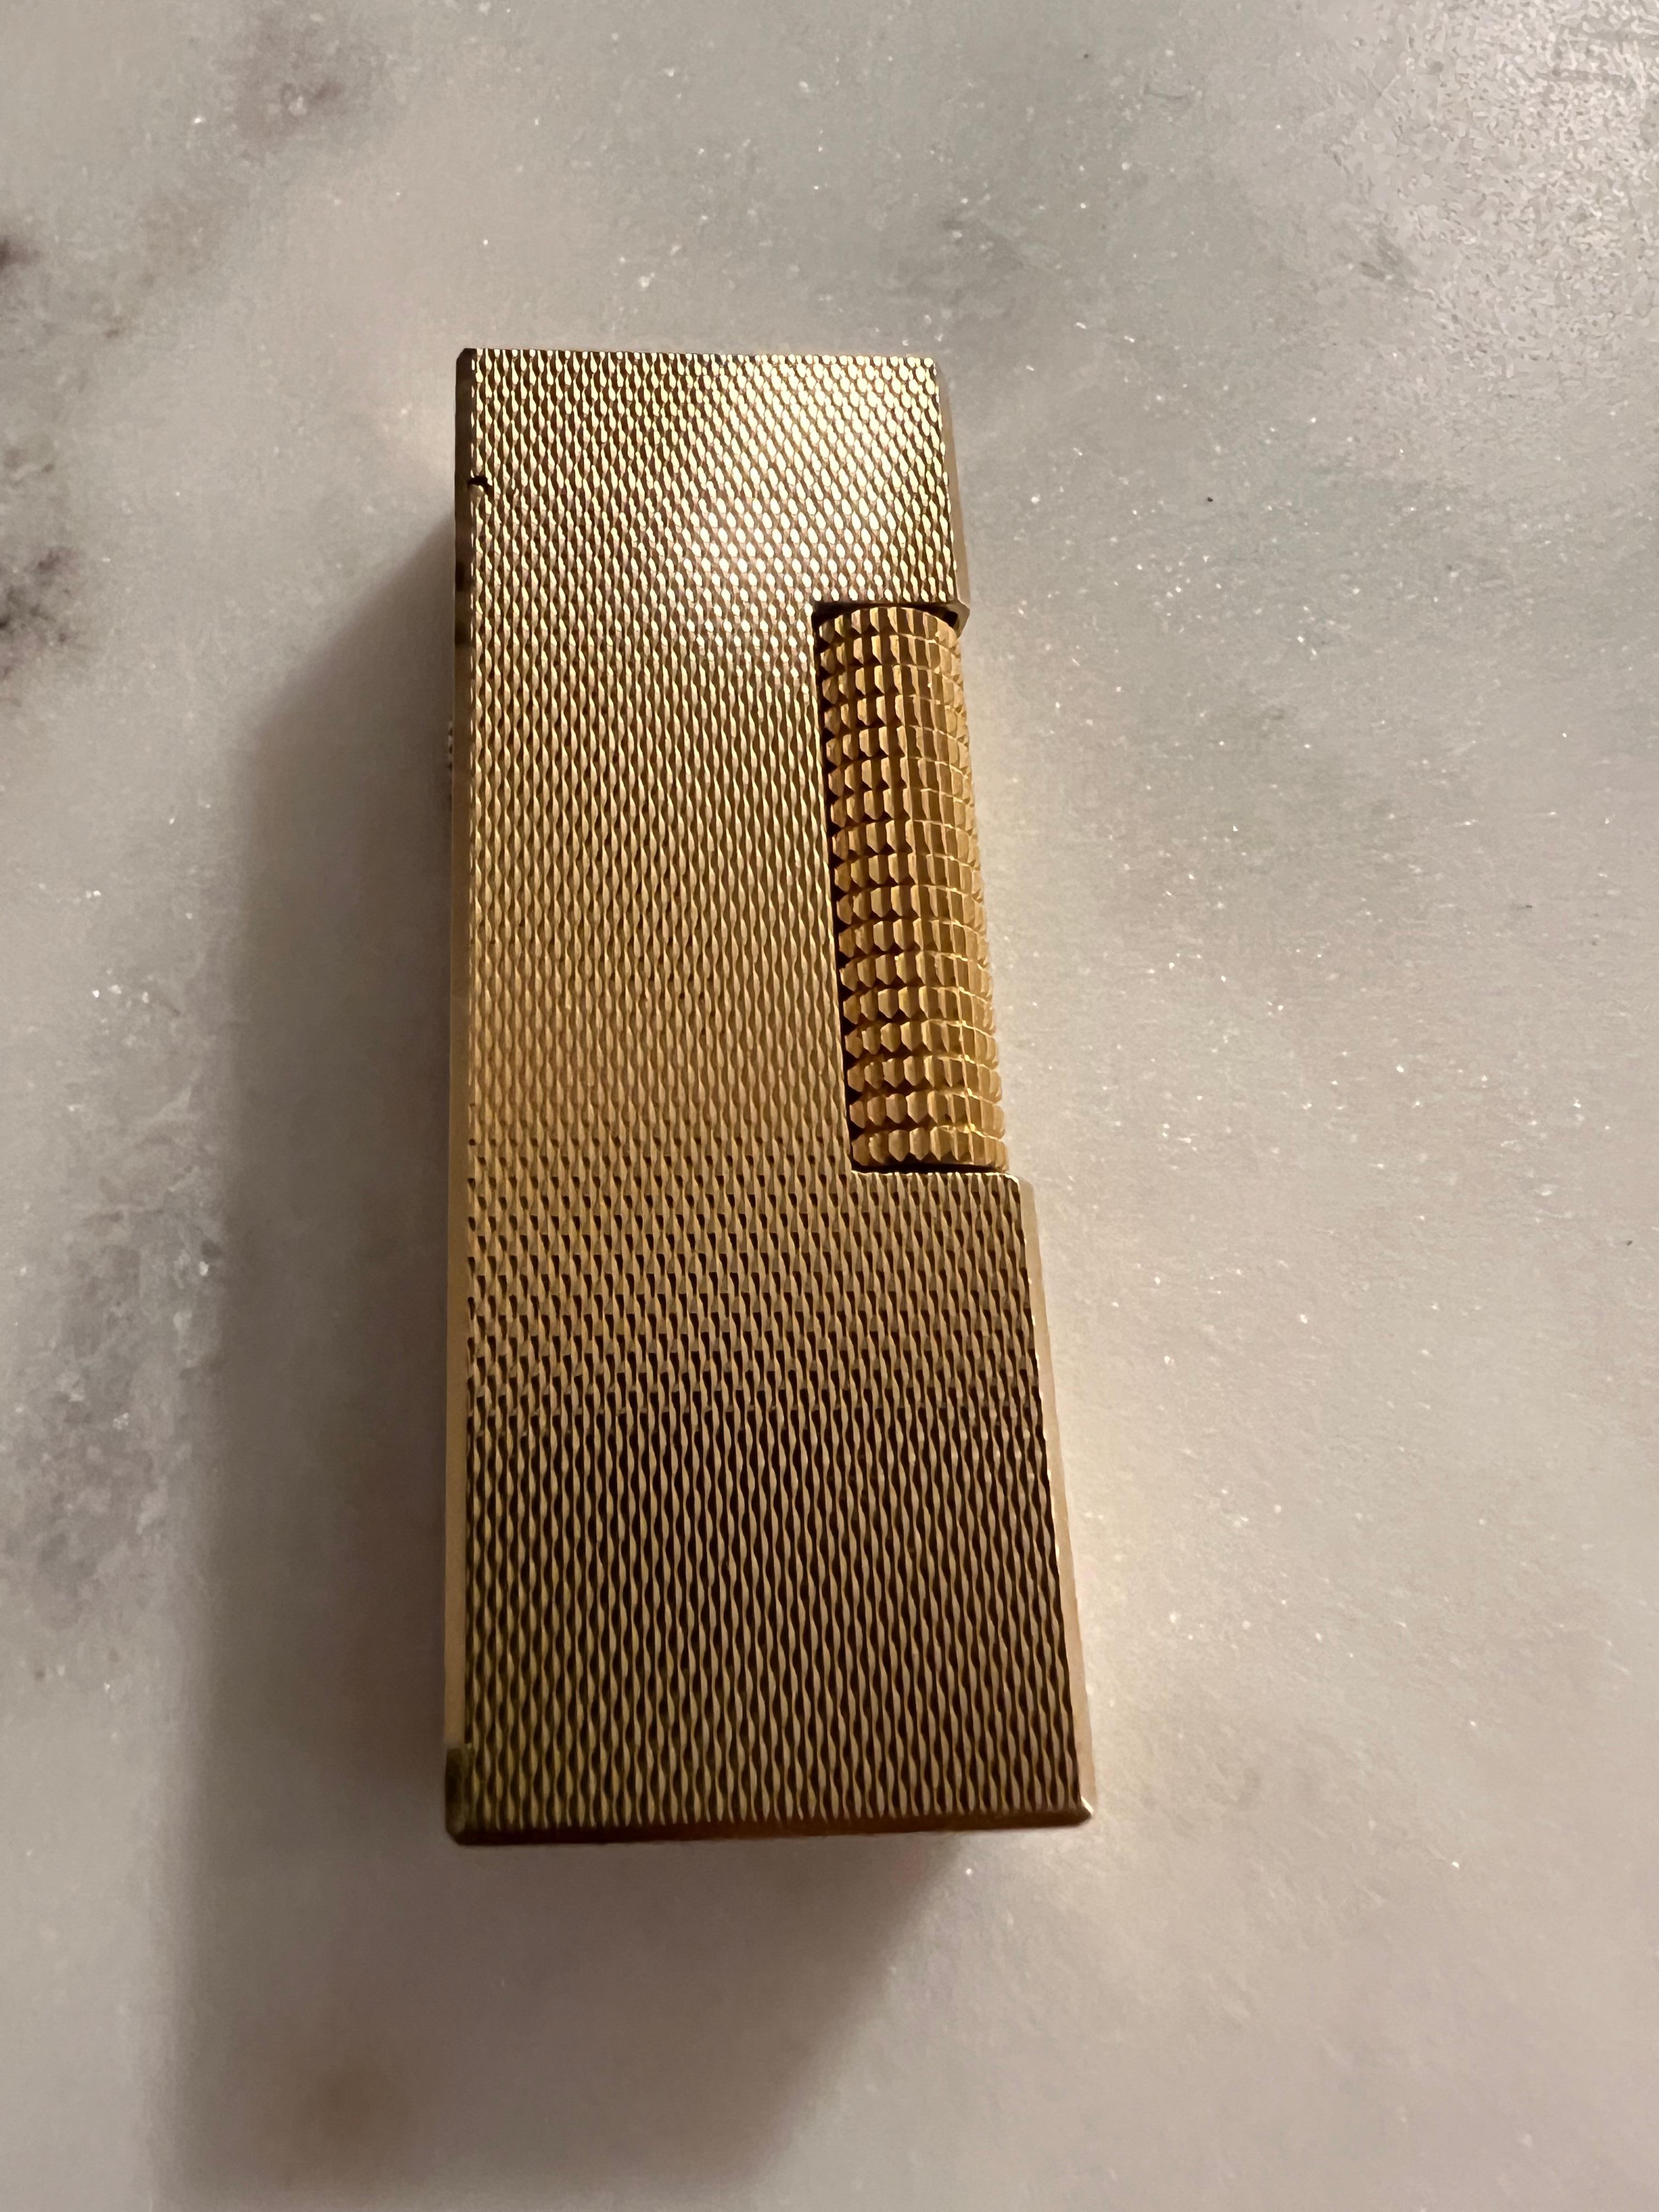 The James Bond Iconic and Rare Vintage Dunhill Gold and Swiss Made Lighter 7